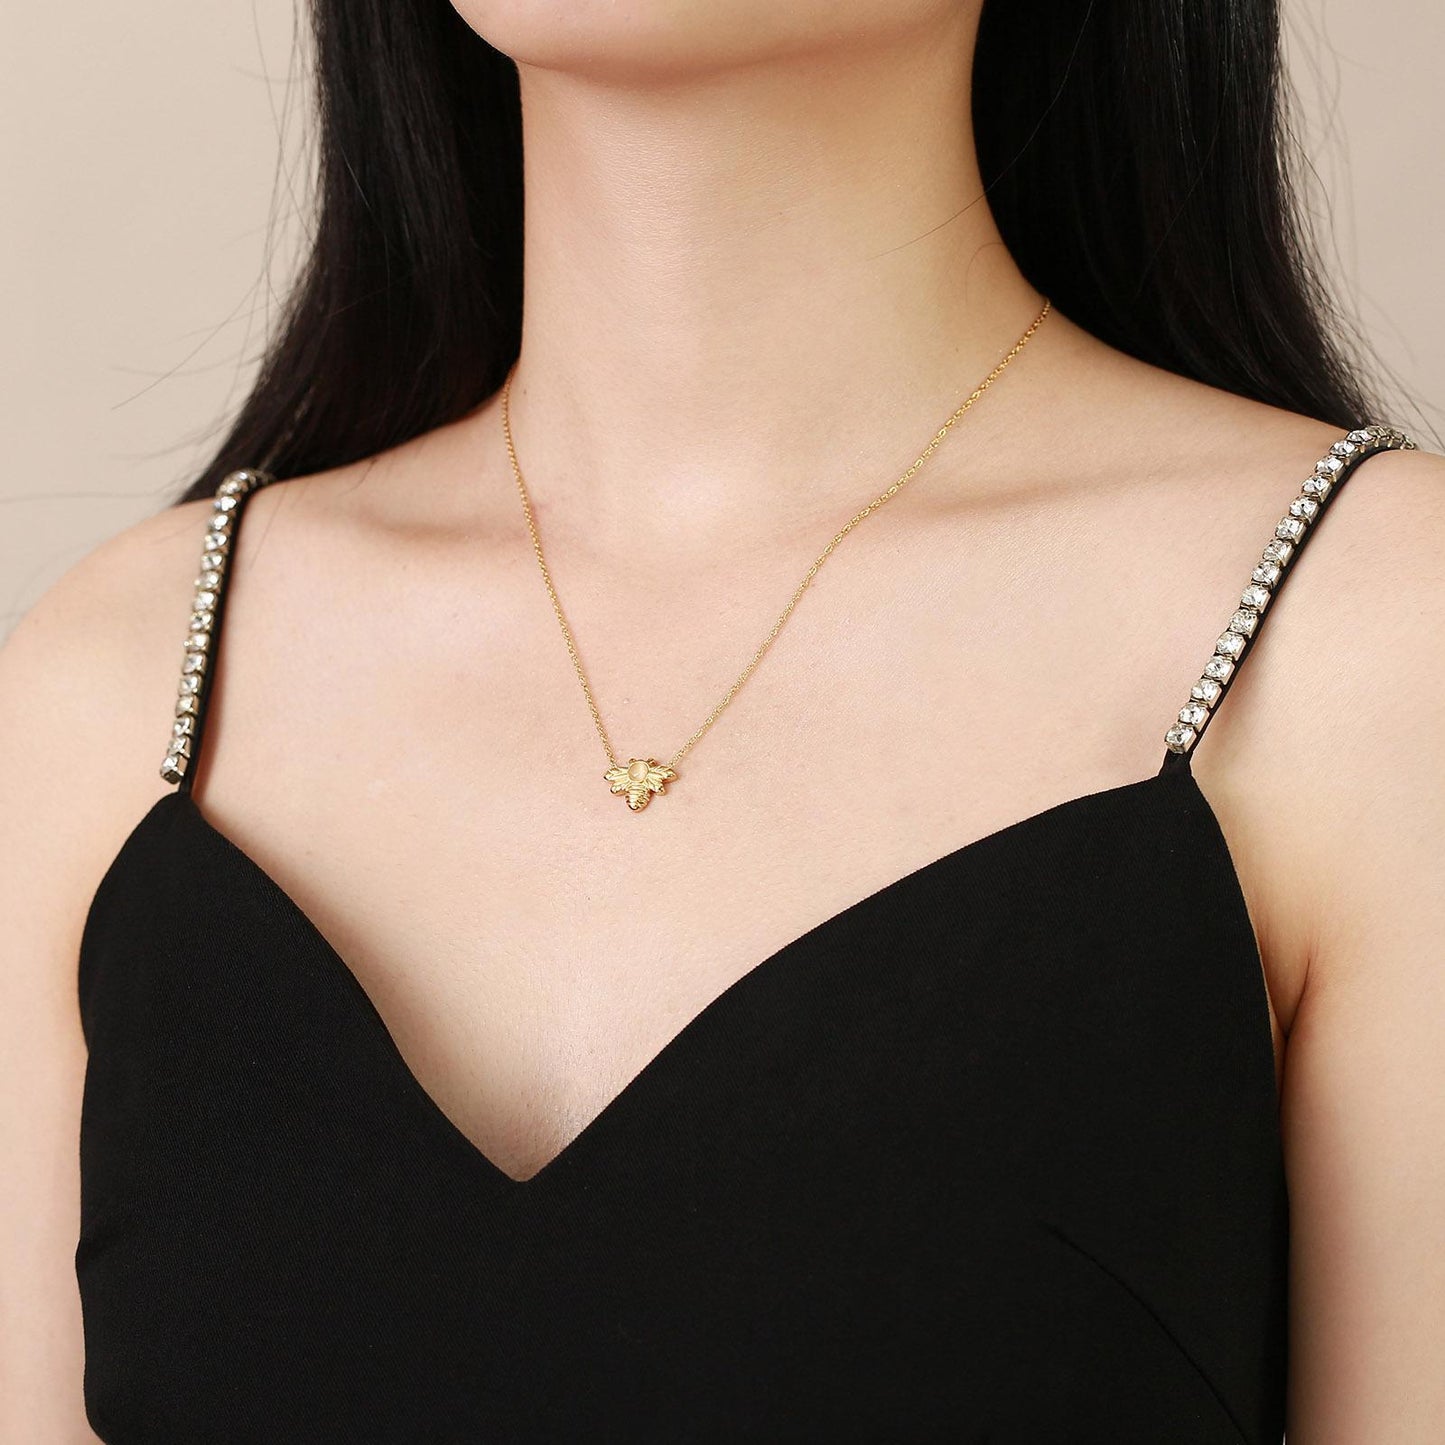 Non-fading women's bee necklace